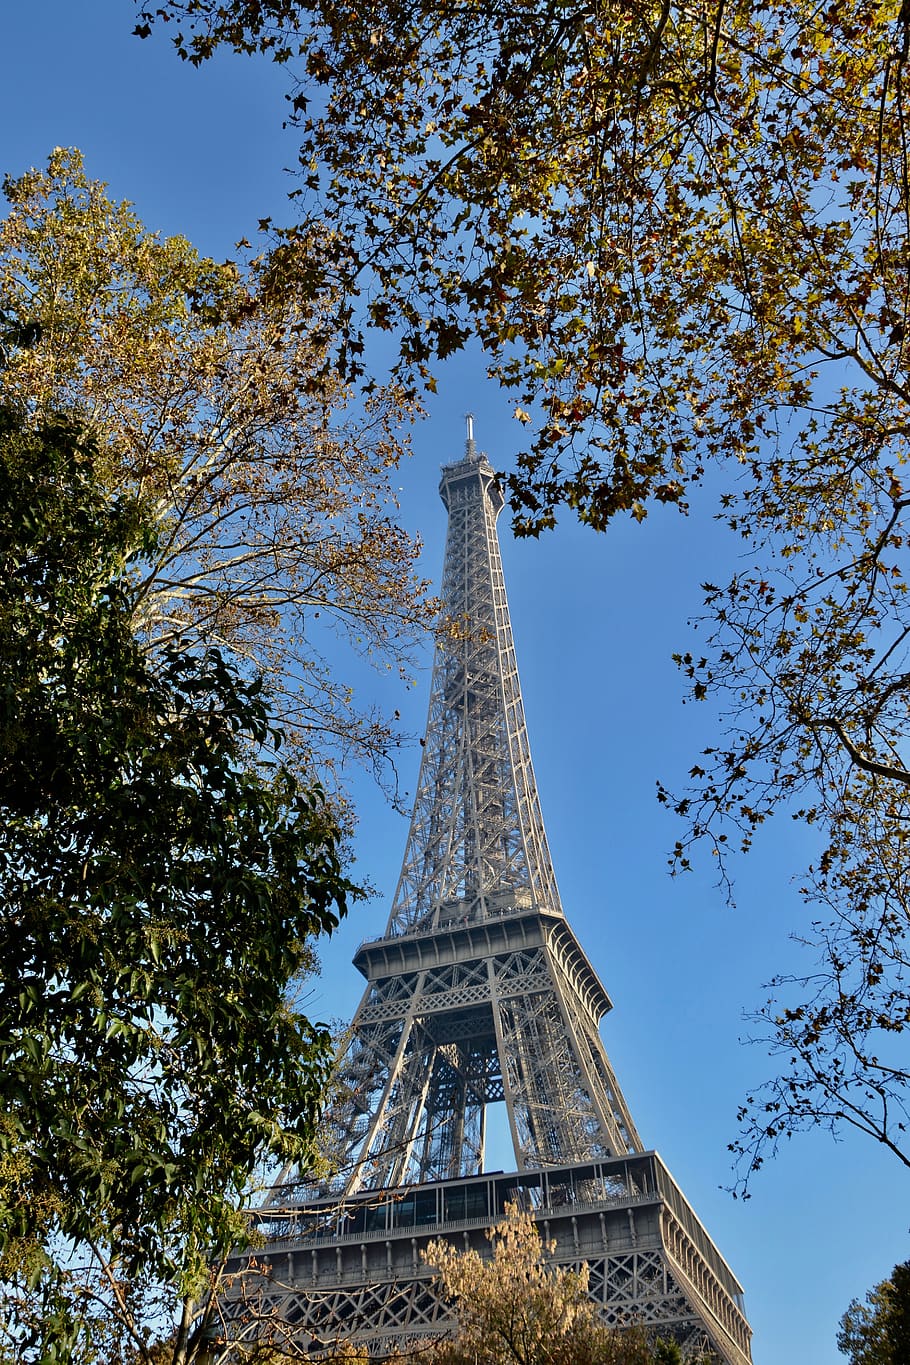 eiffel tower, paris is the capital of french, monument, heritage